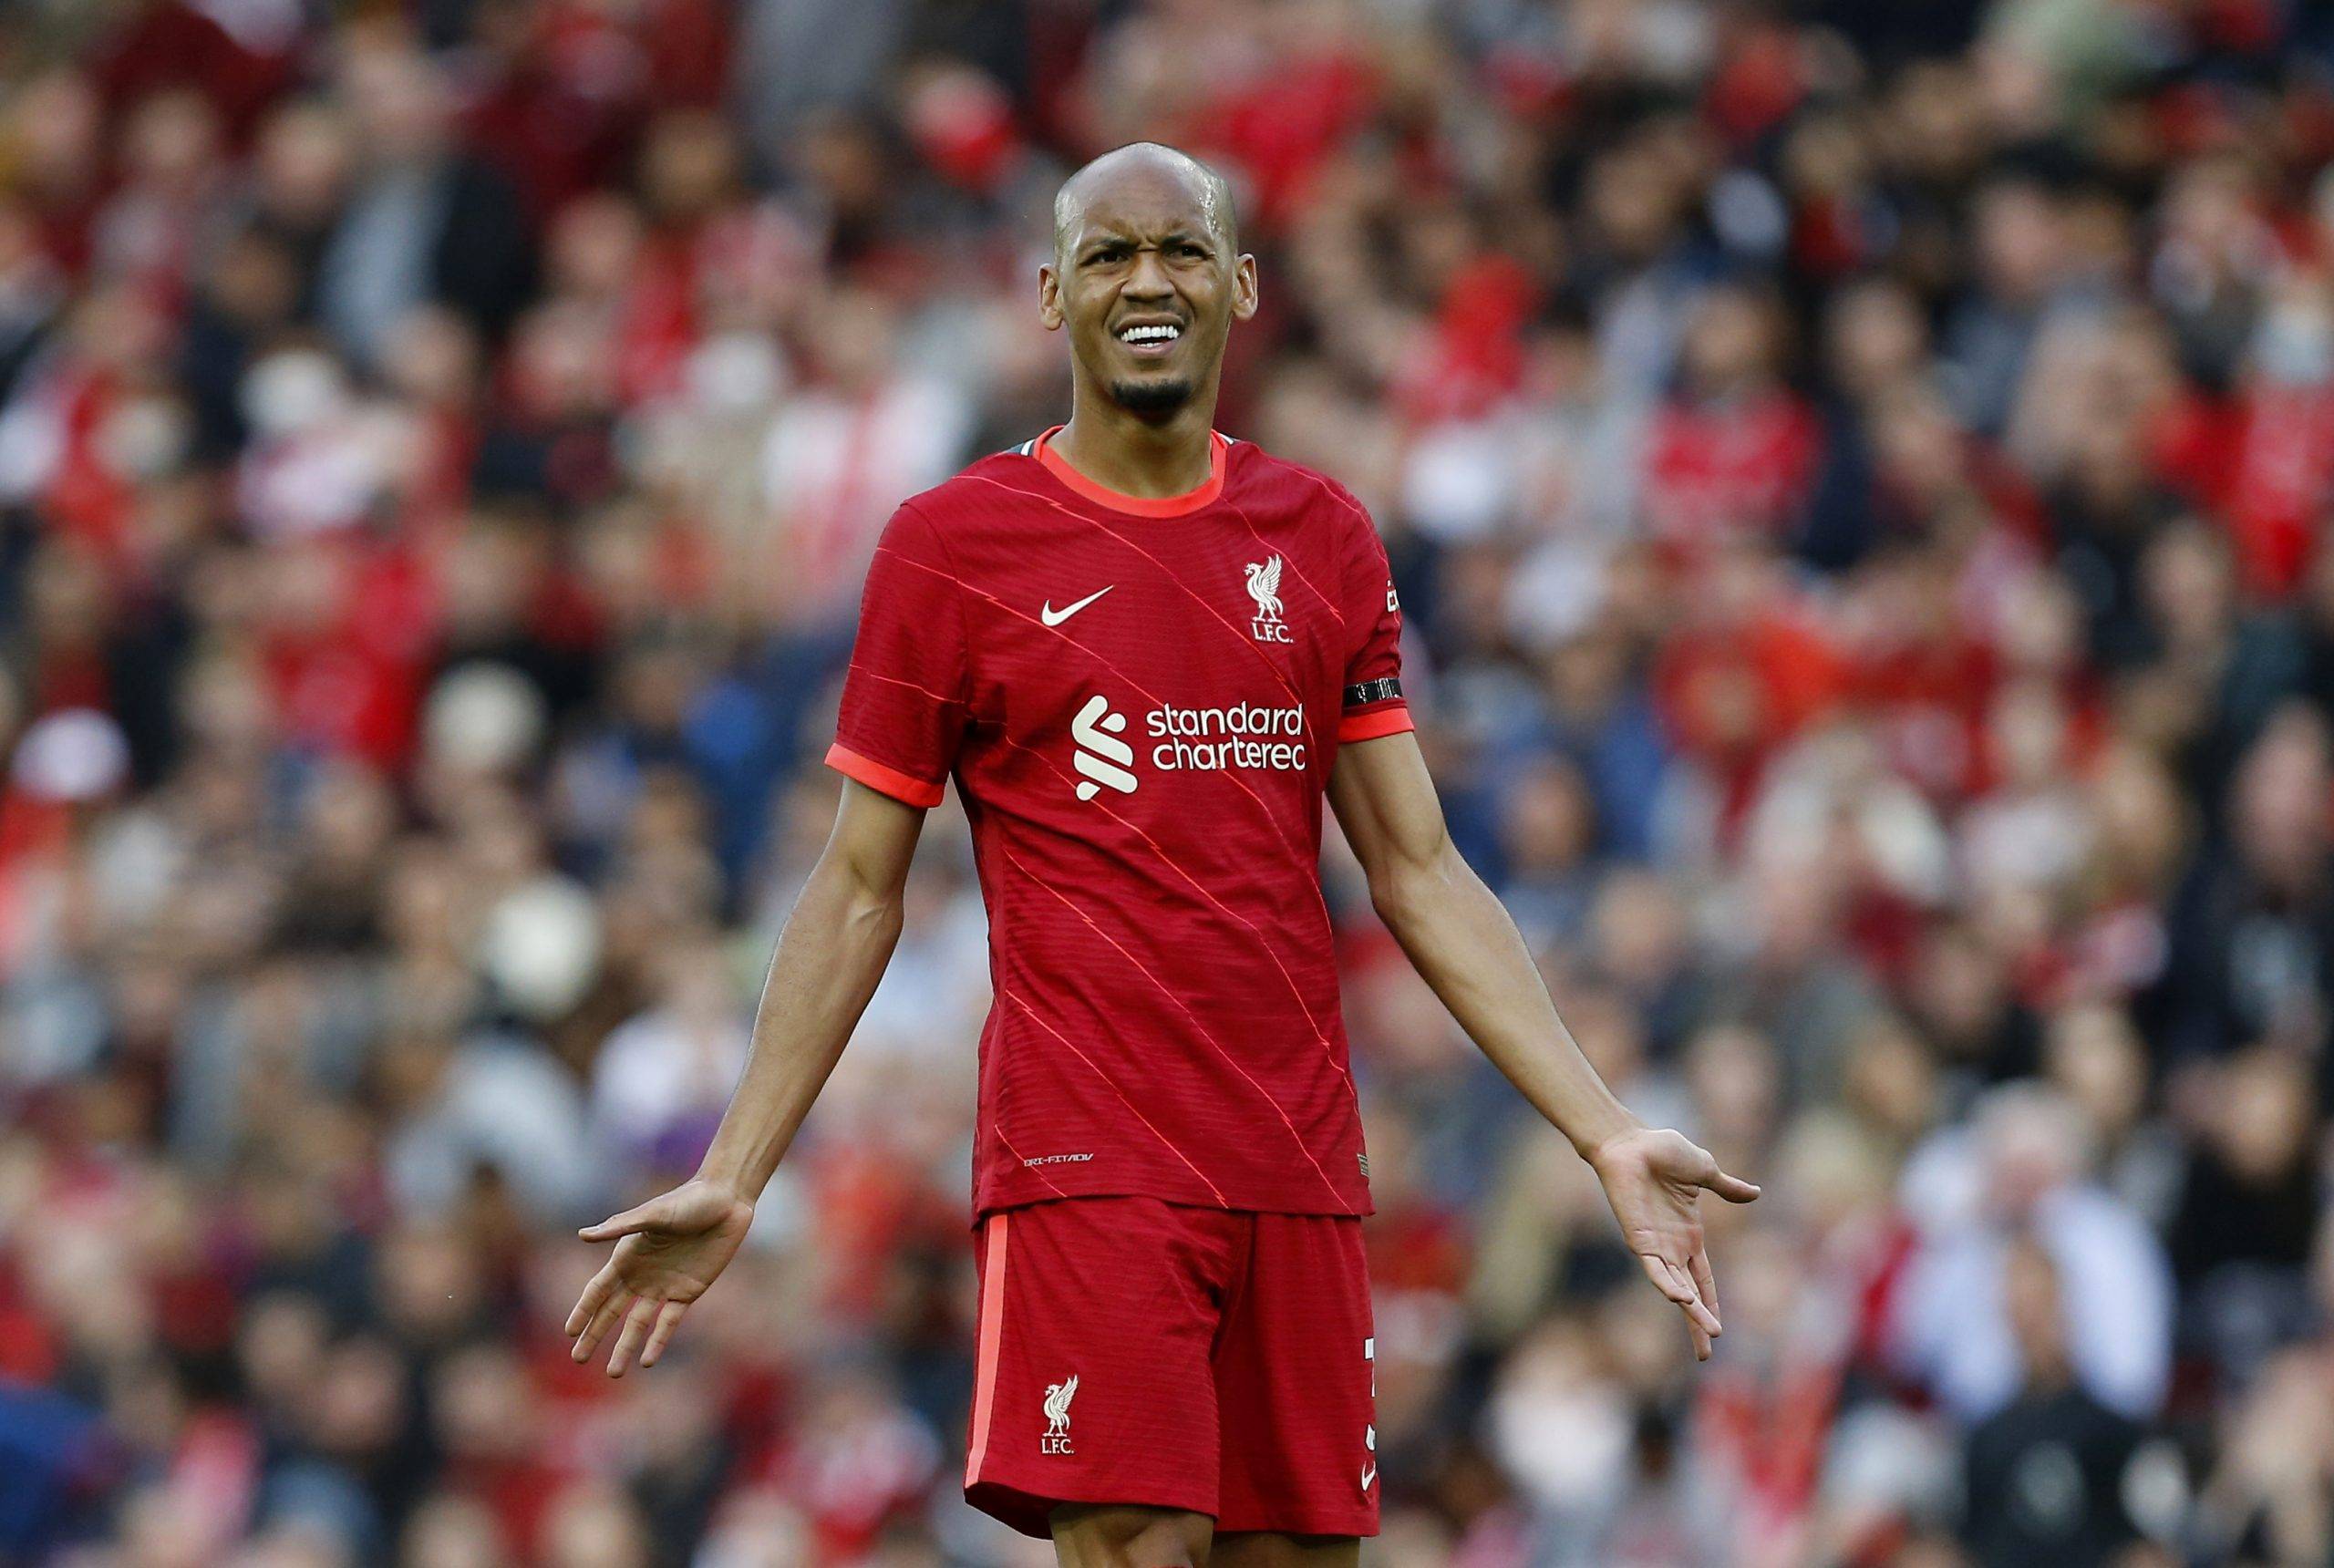 Liverpool: Pundit claims Reds should’ve signed a midfielder to replace Fabinho - Follow up